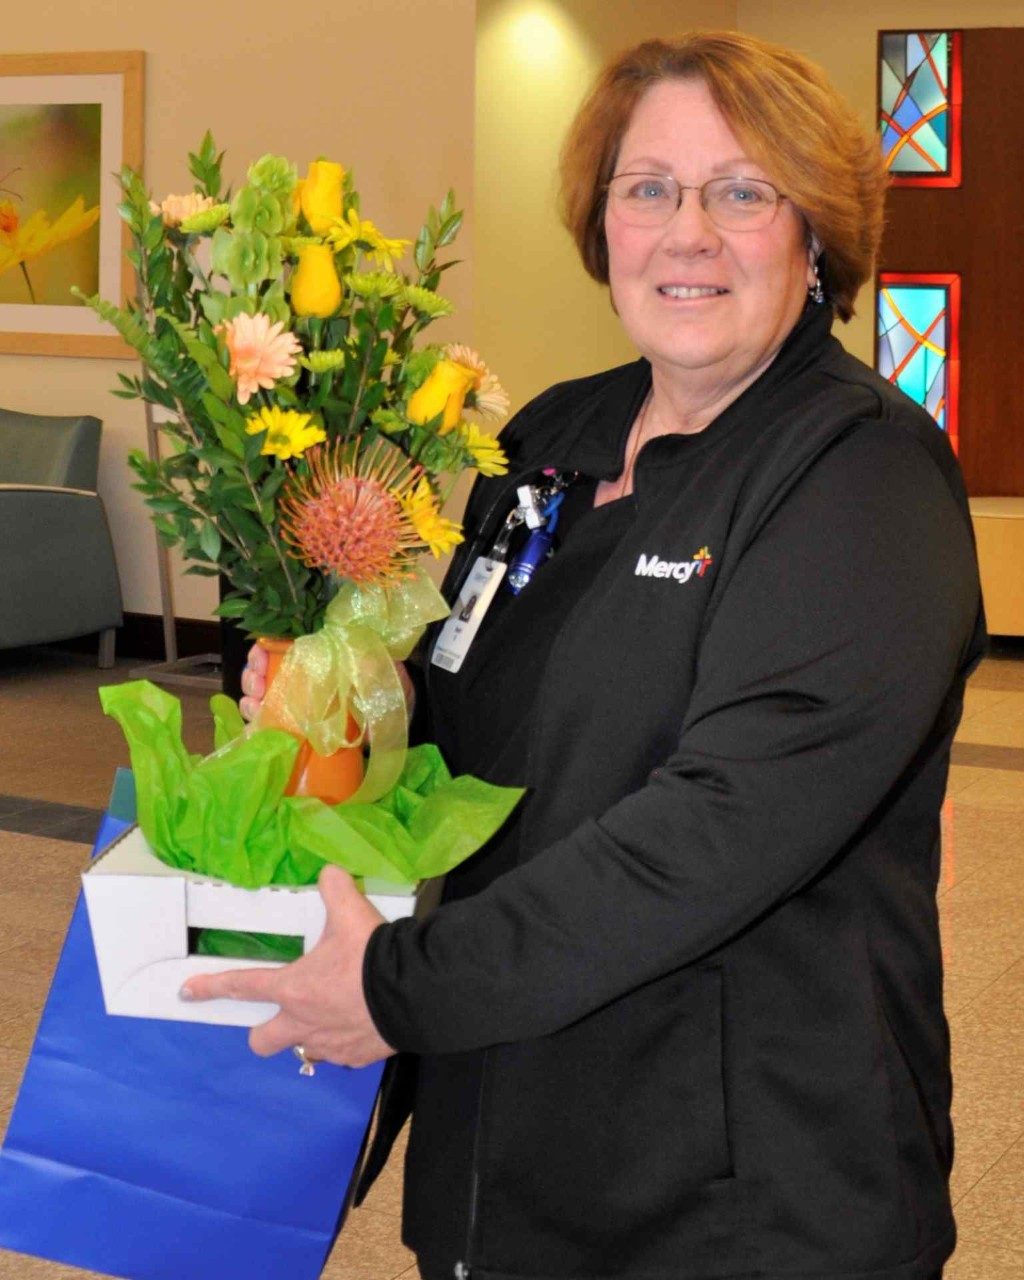 Beth Shane, ultrasound technologist, has earned the Daffodil Award for providing outstanding, compassionate care at Mercy Hospital South.